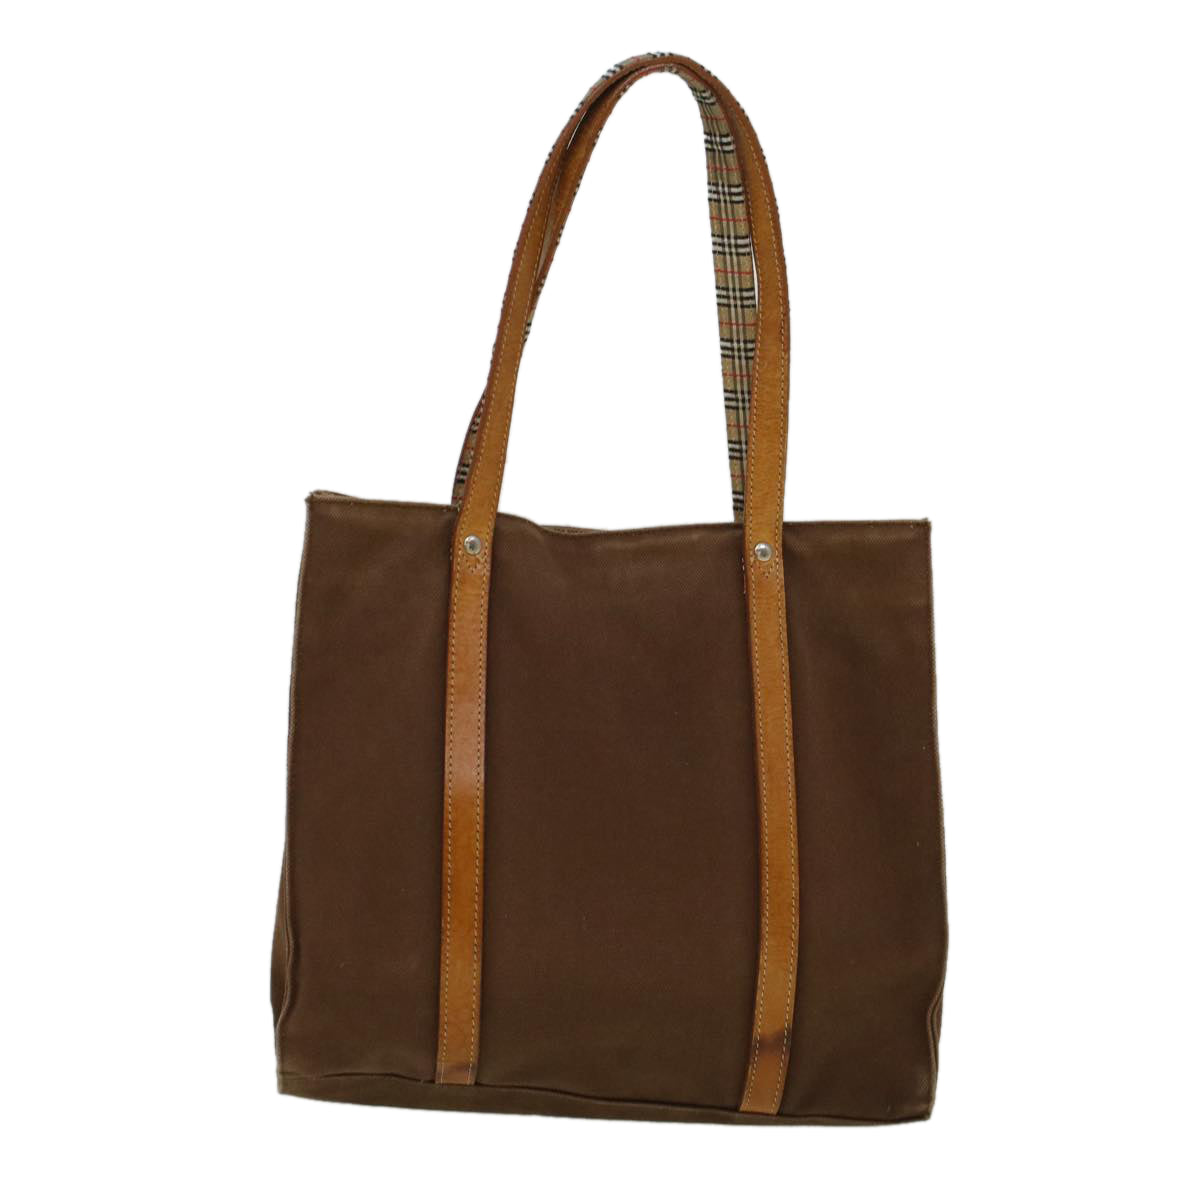 Burberrys Blue Label Tote Bag Canvas Leather Brown Auth ti1321 - 0